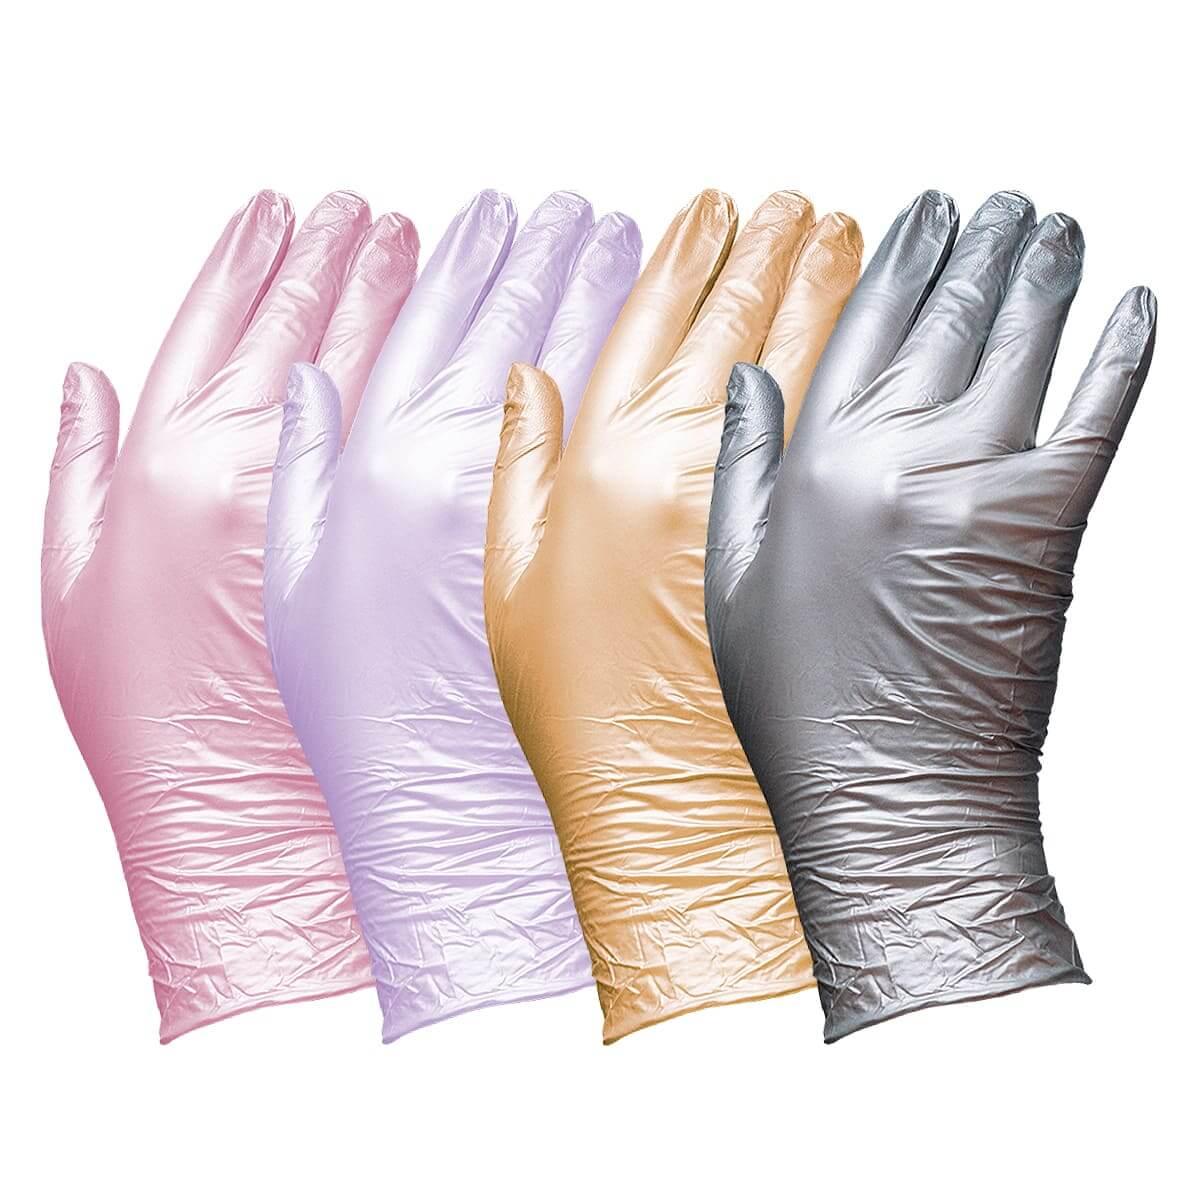 Unigloves Nitrile Gloves Fancy Rose - Tattoo Everything Supplies